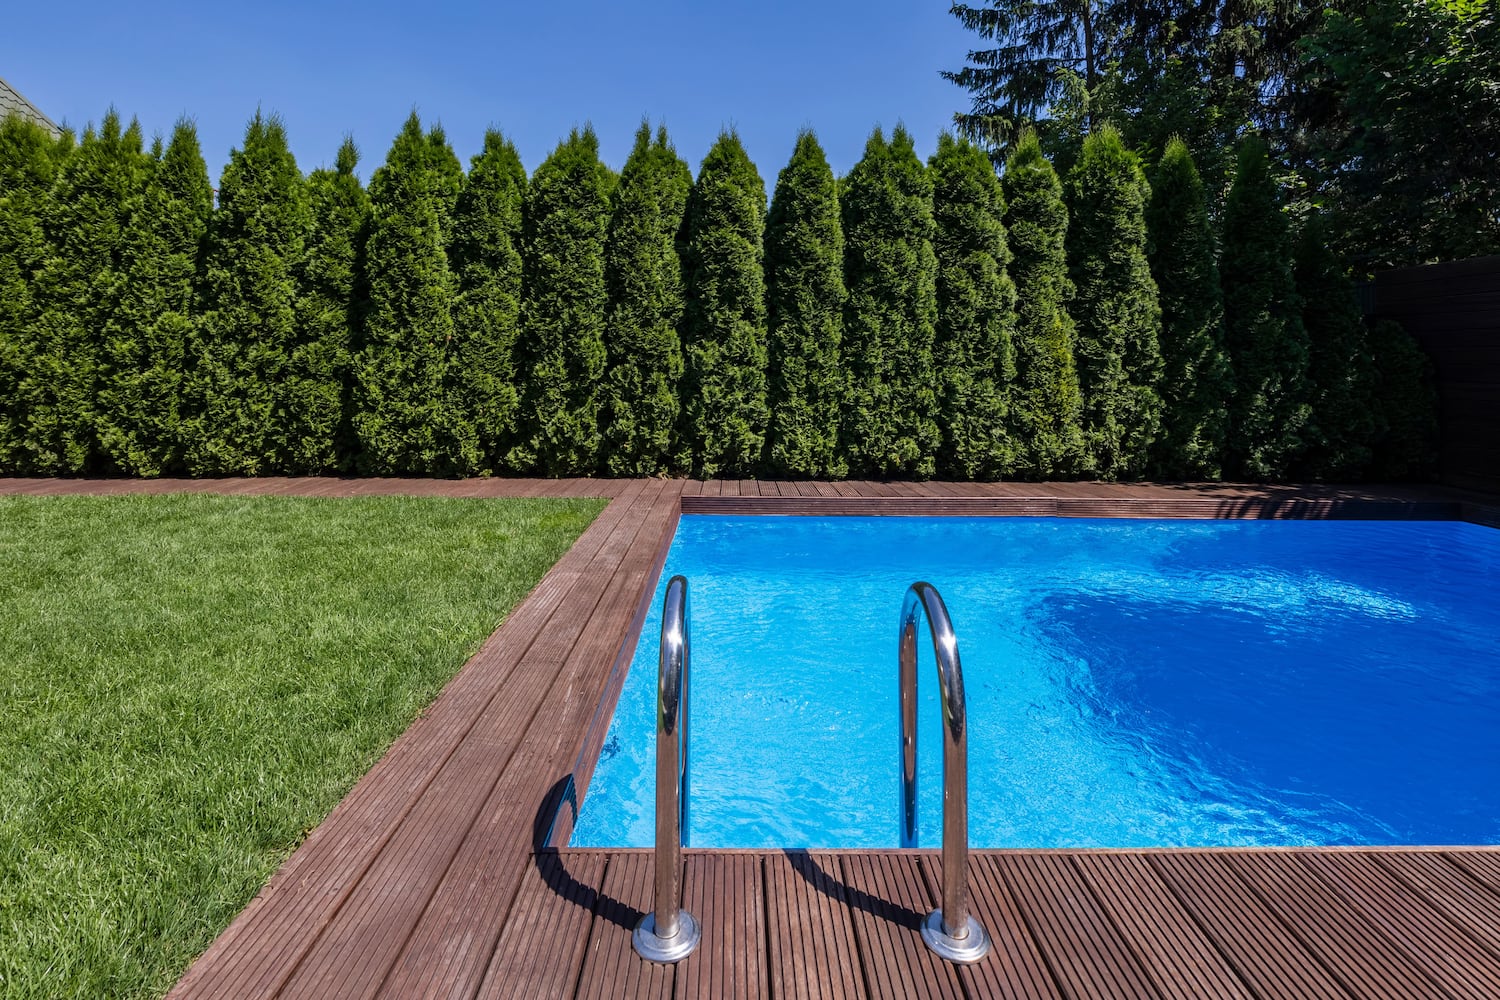 Pool fence ideas with plants as a disguise 